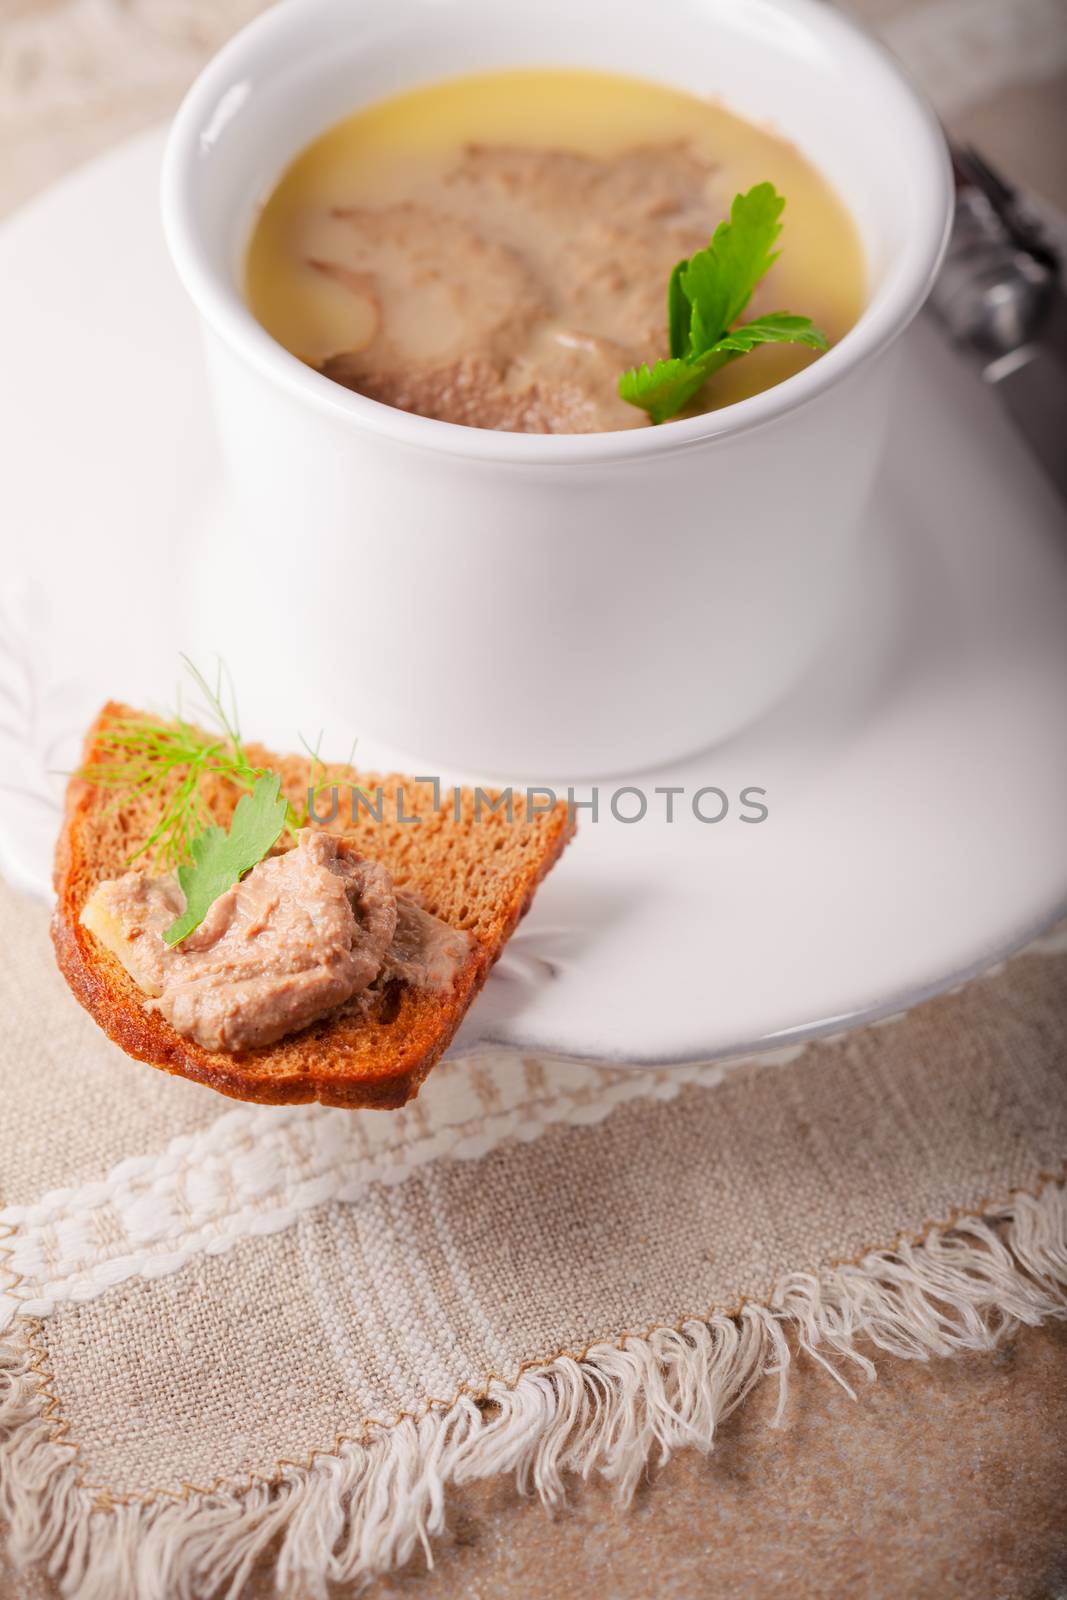 Home made chicken liver pate by supercat67